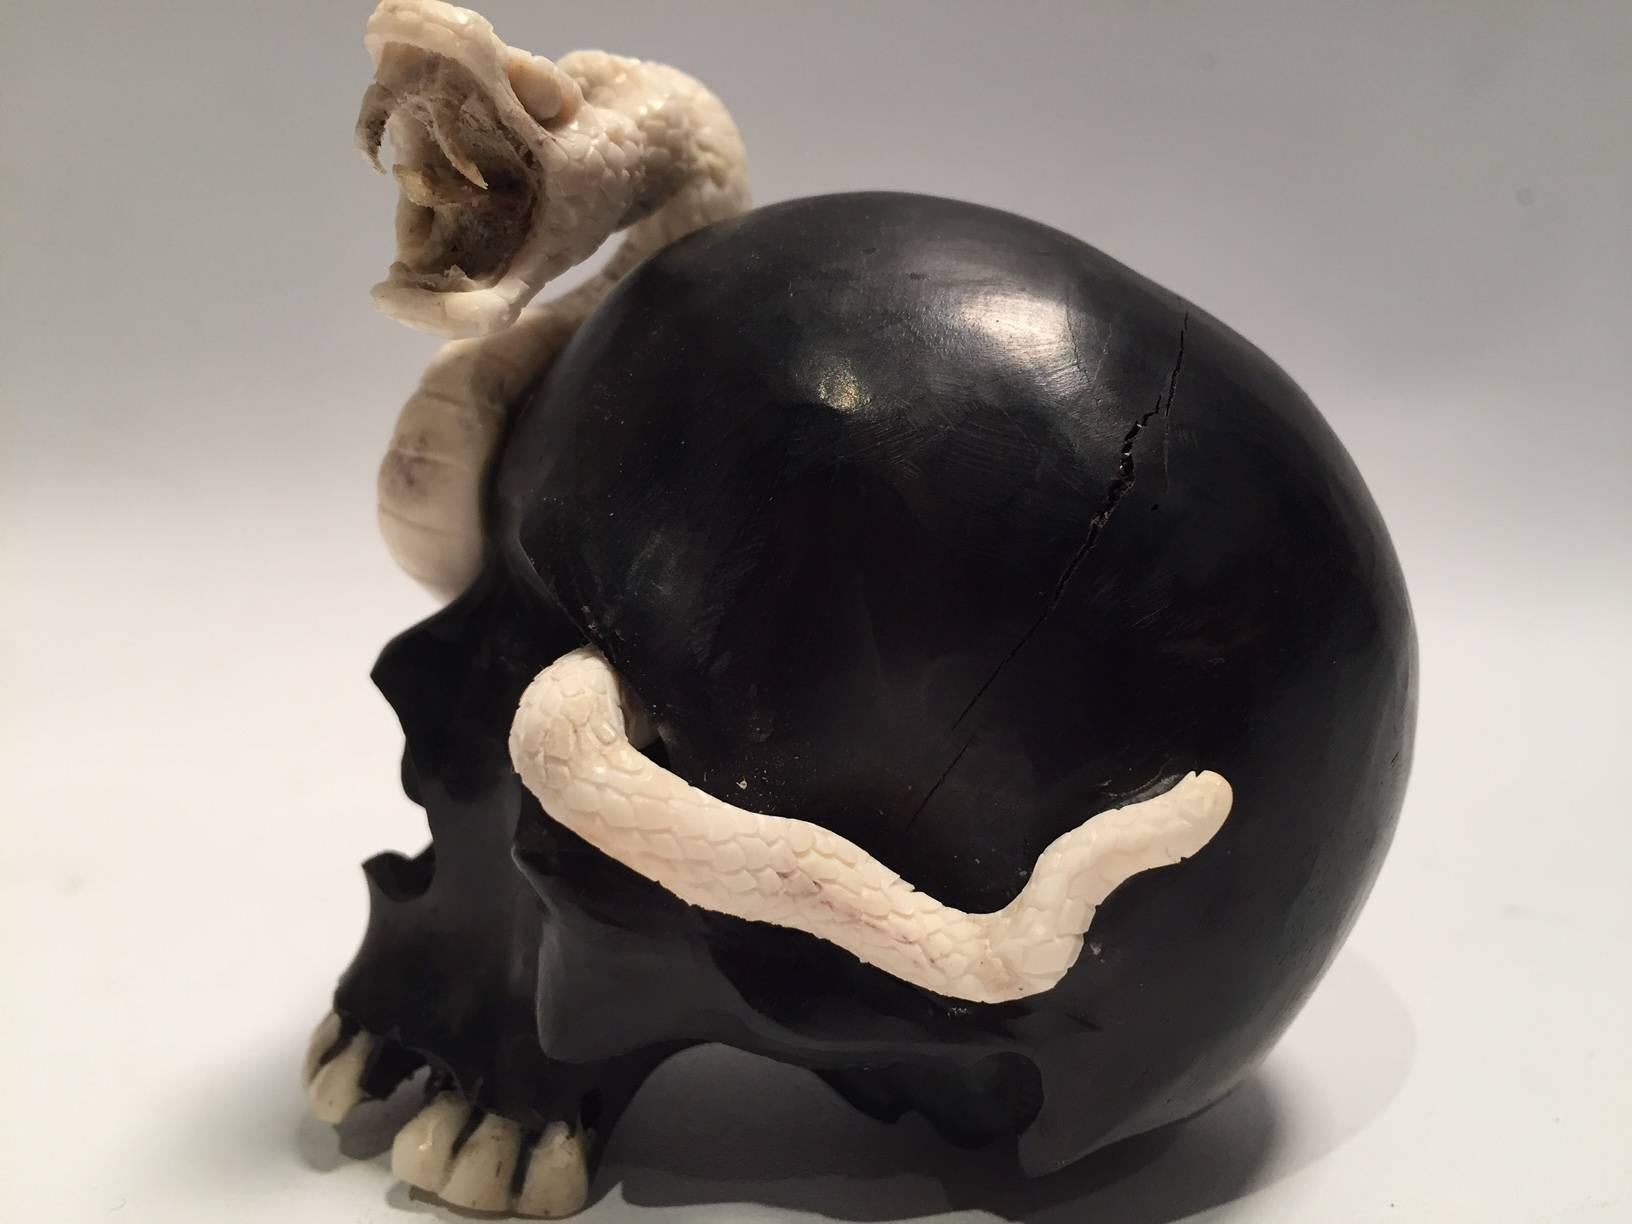 Beautifully sculpted wood skull with an intertwined carved moose antler snake. Meticulously created by skilled Indonesian artist this is a one of a kind piece made exclusively for Creel and Gow.